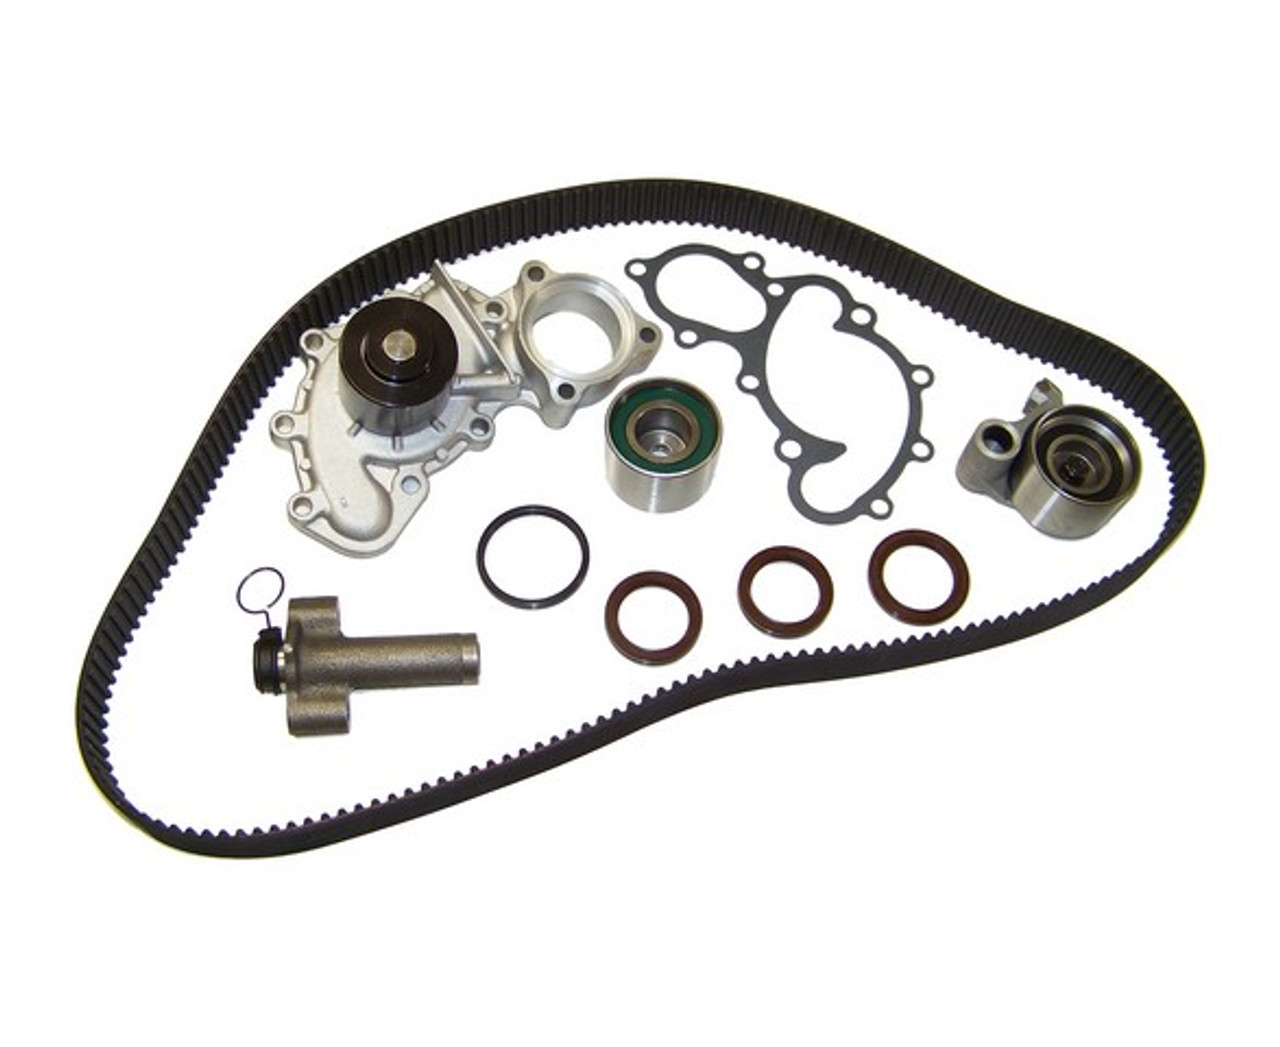 Timing Belt Kit with Water Pump 3.4L 2000 Toyota Tundra - TBK965AWP.22